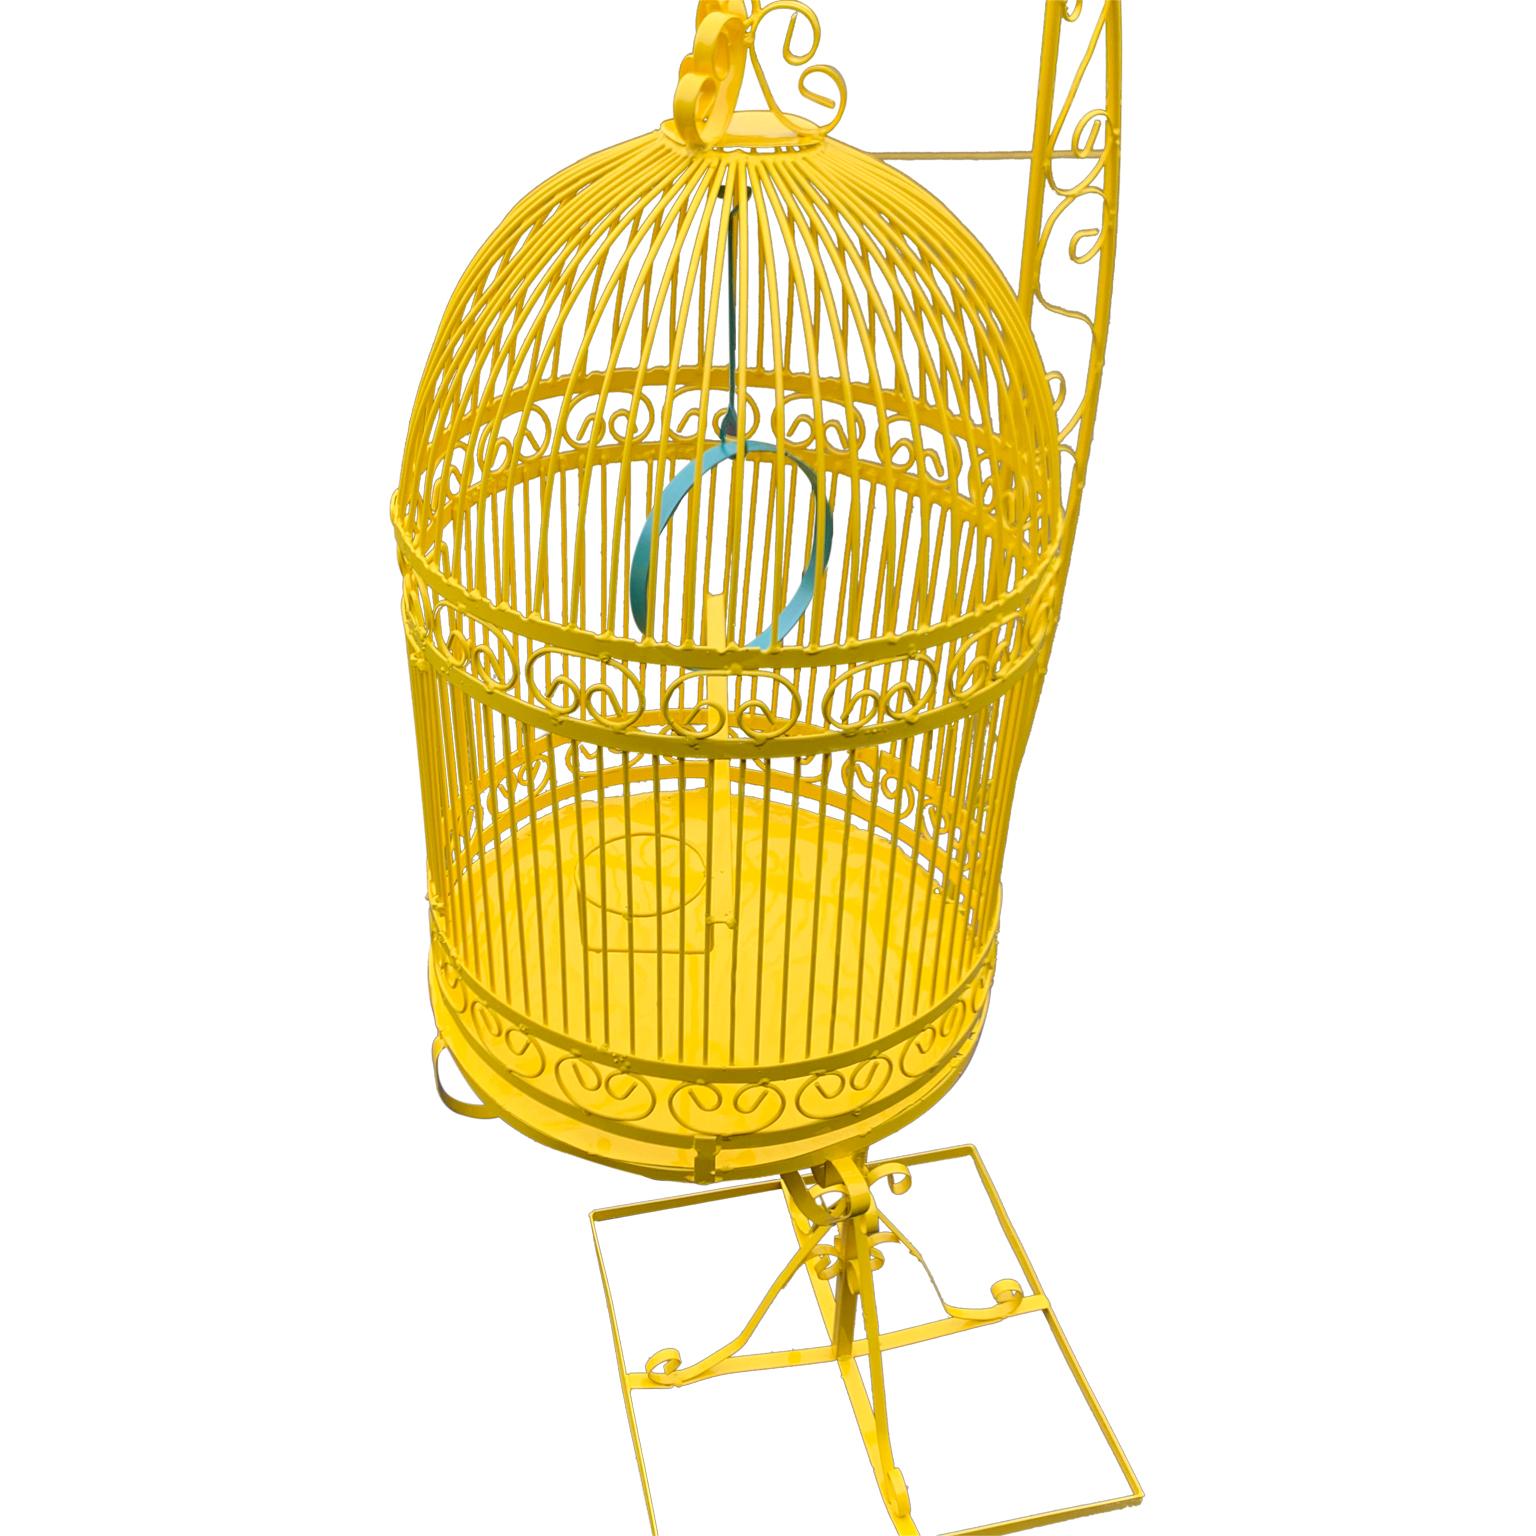 20th Century Vintage Metal Birdcage On Stand, Newly Powder-Coated In Bright Sunshine Yellow